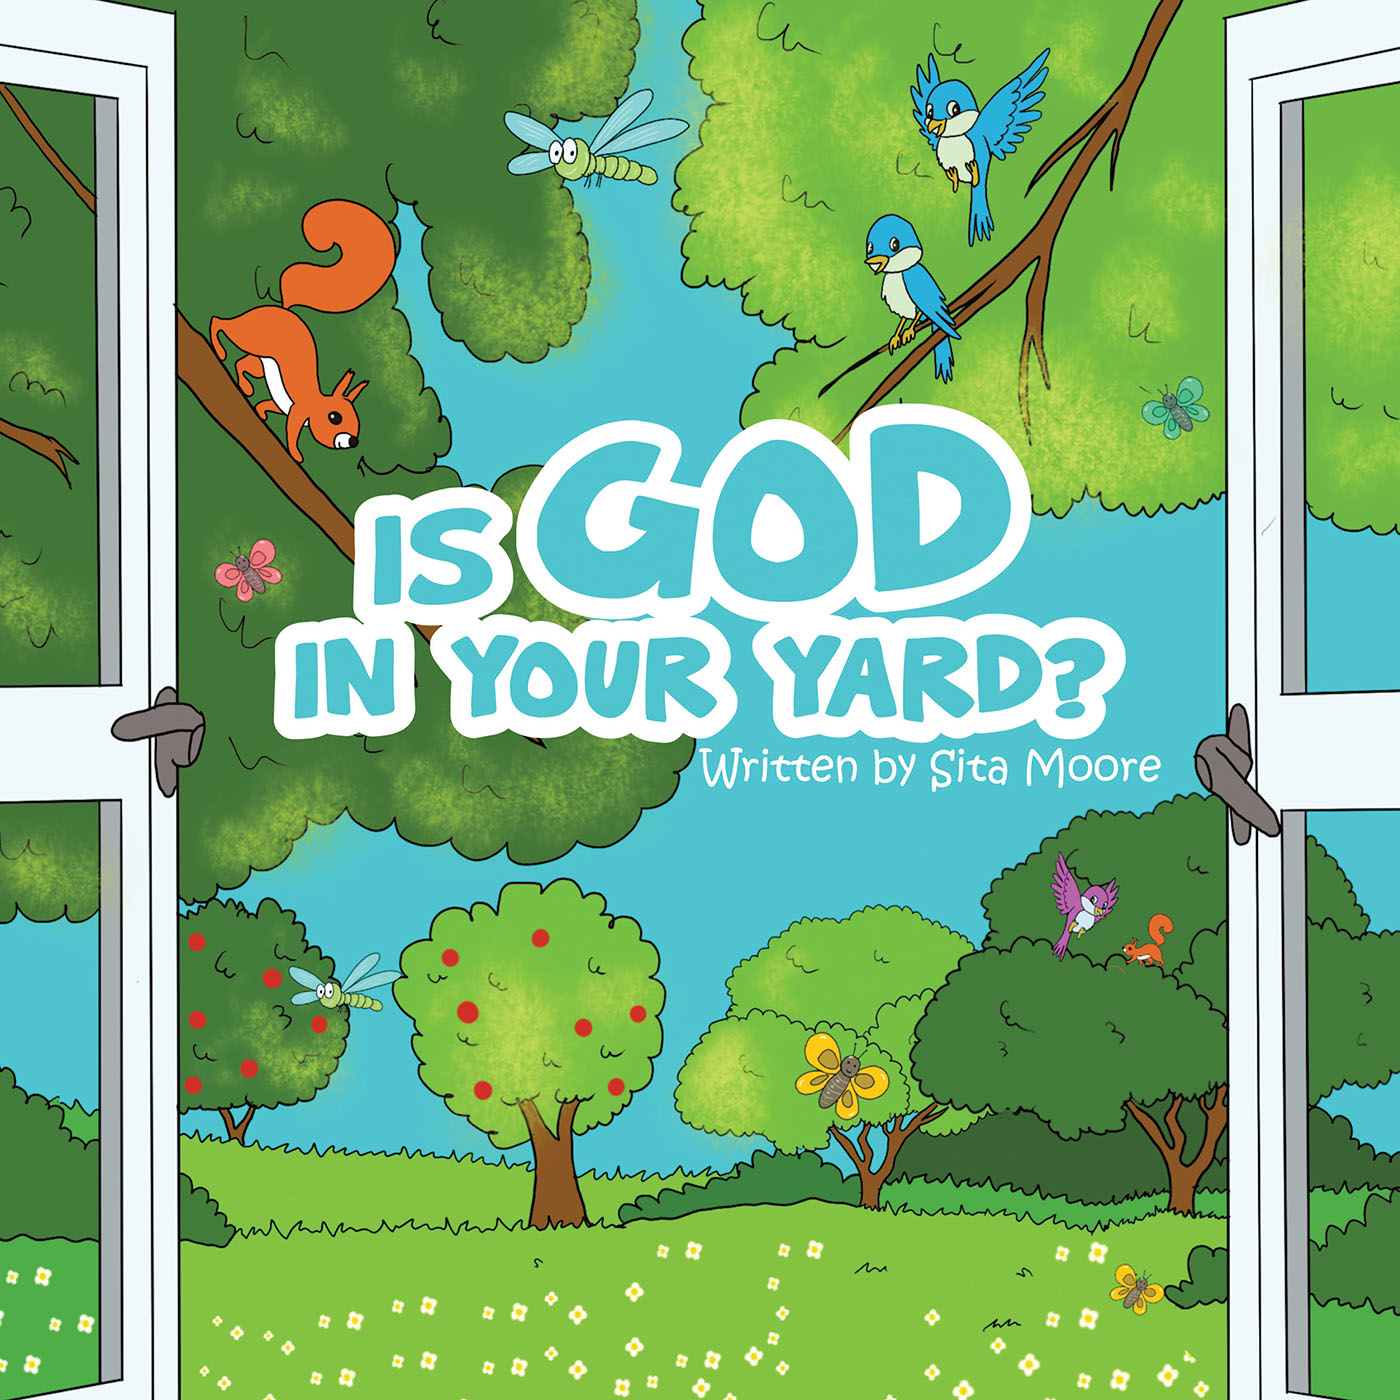 Sita Moore’s Newly Released “Is God In Your Yard?” is a Touching, Personal Narrative That Brings Readers an Impactful Message of the Closeness of God